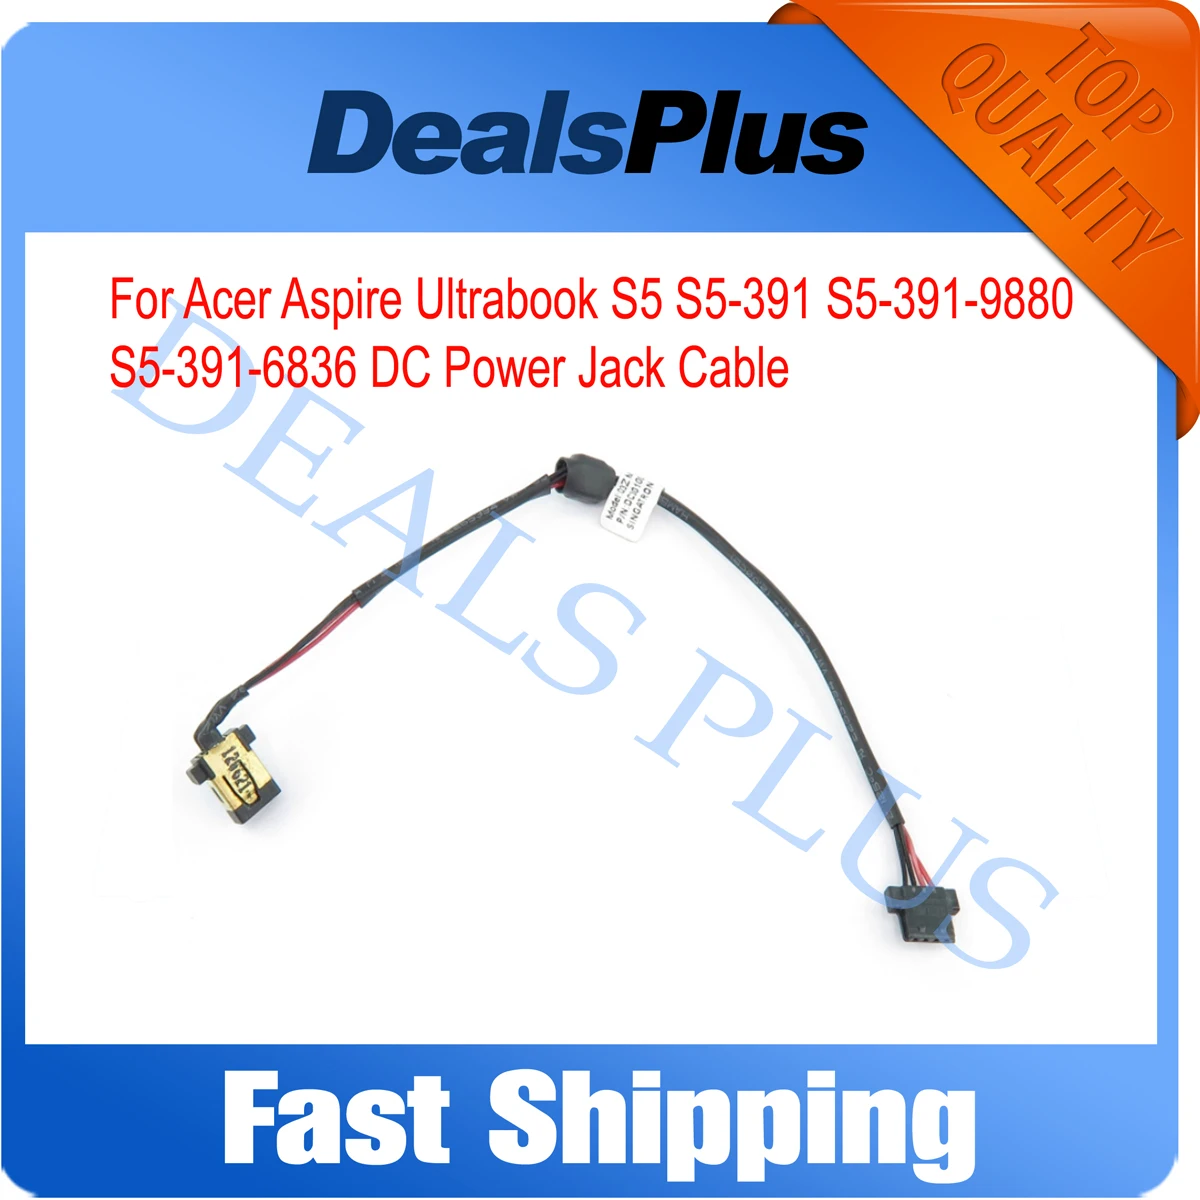 

New Replacement DC Power Jack Cable For Acer Aspire Ultrabook S5 S5-391 S5-391-9880 S5-391-6836 Q3ZMC DC30100LA00 DC30100ULA